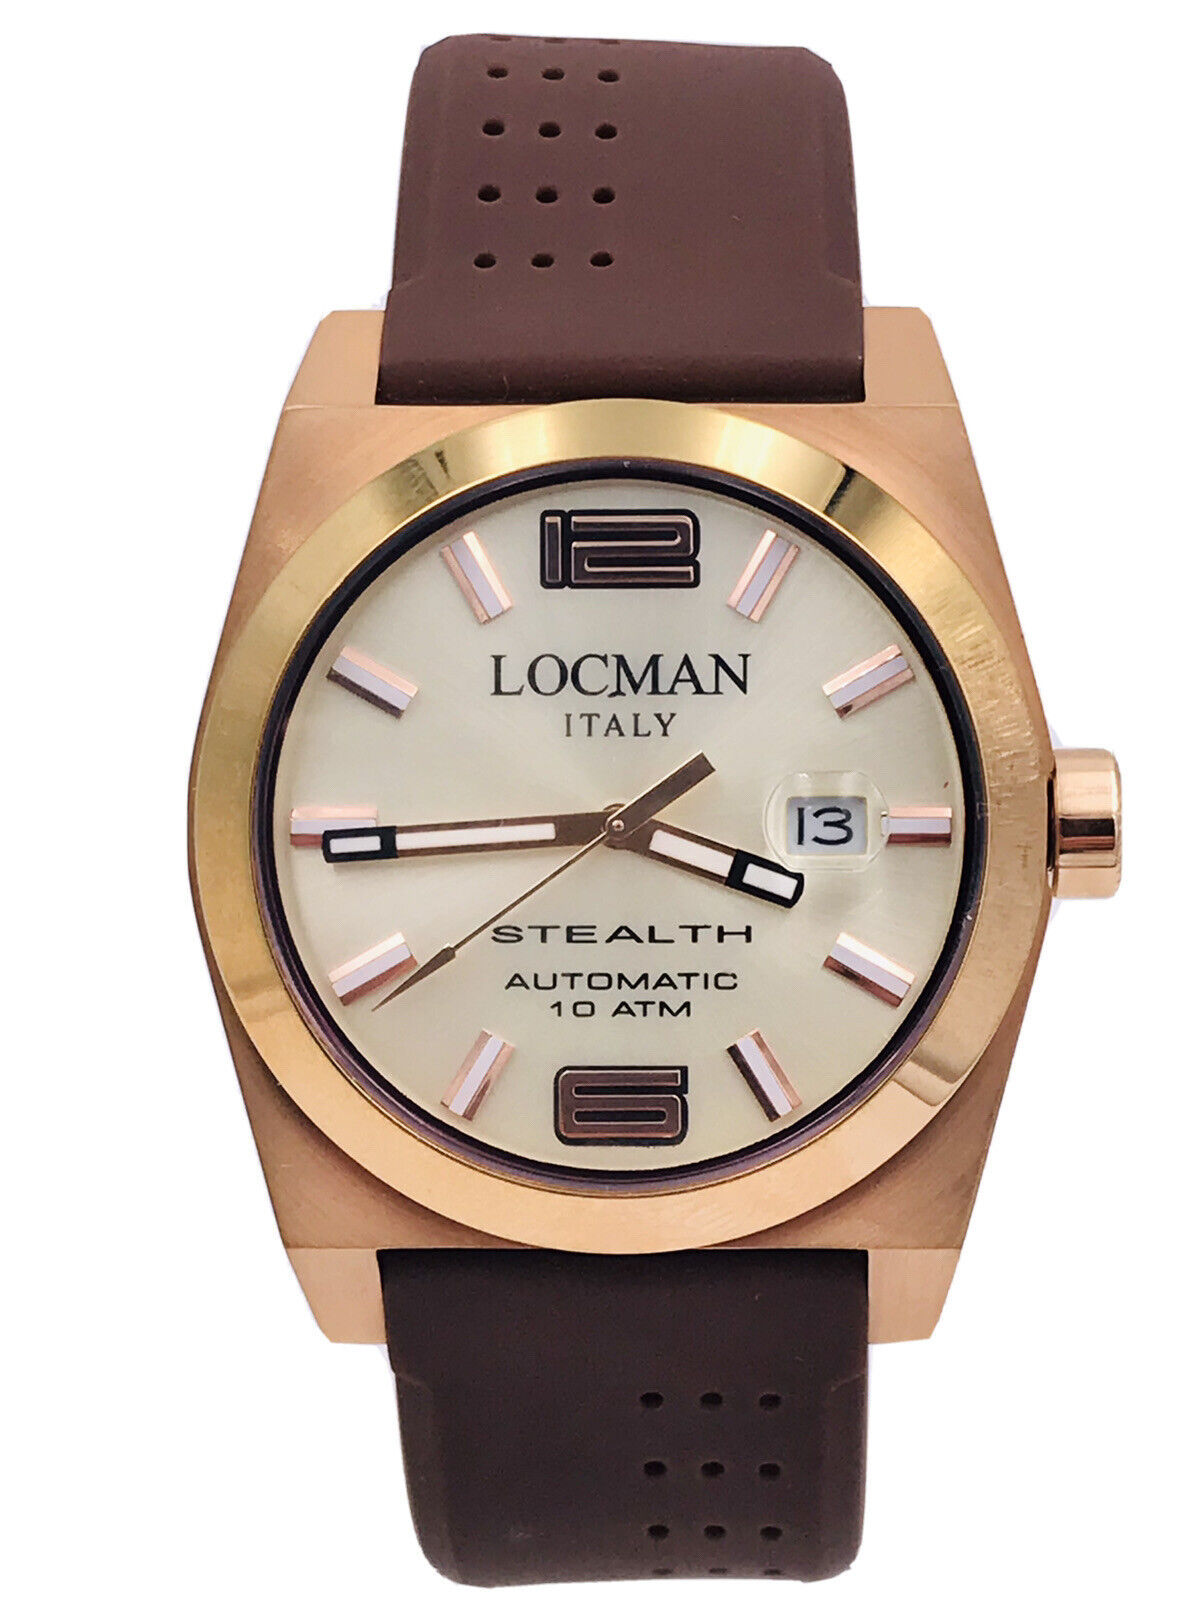 Watch Locman Stealth Automatic 205PRR/565 1 21/32in Rubber on Sale New